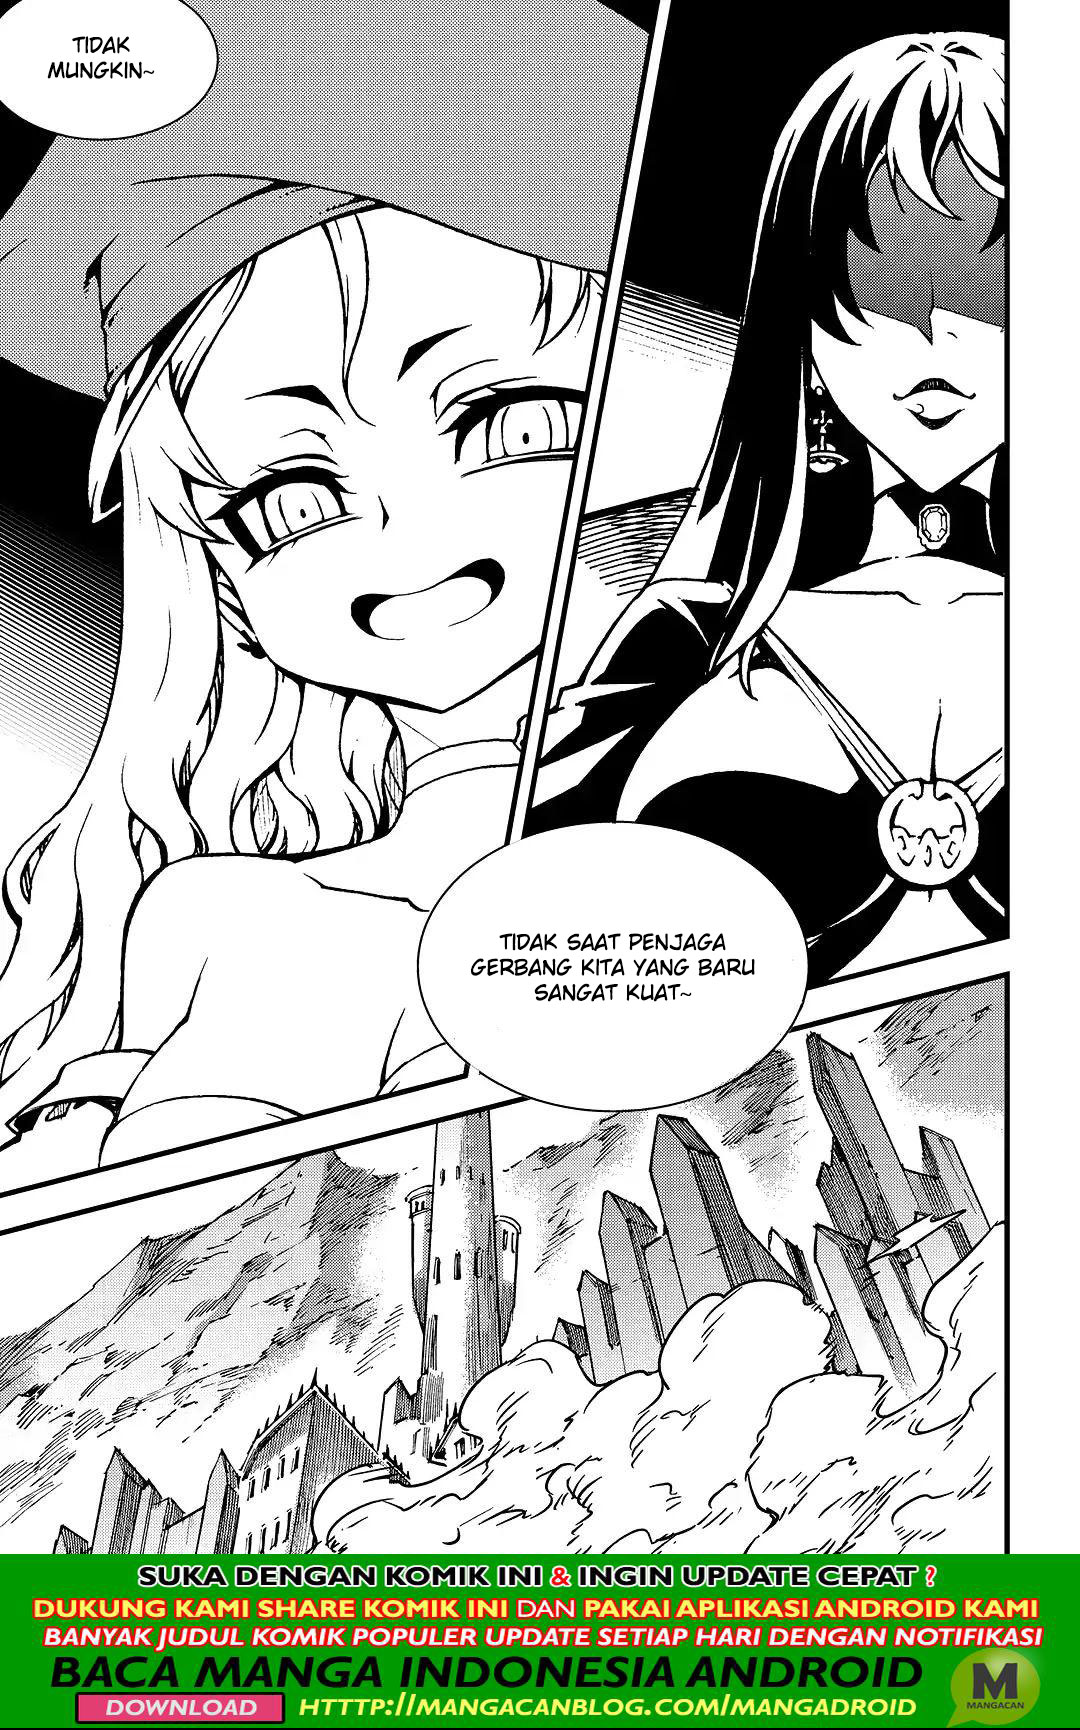 Witch Hunter Chapter 213